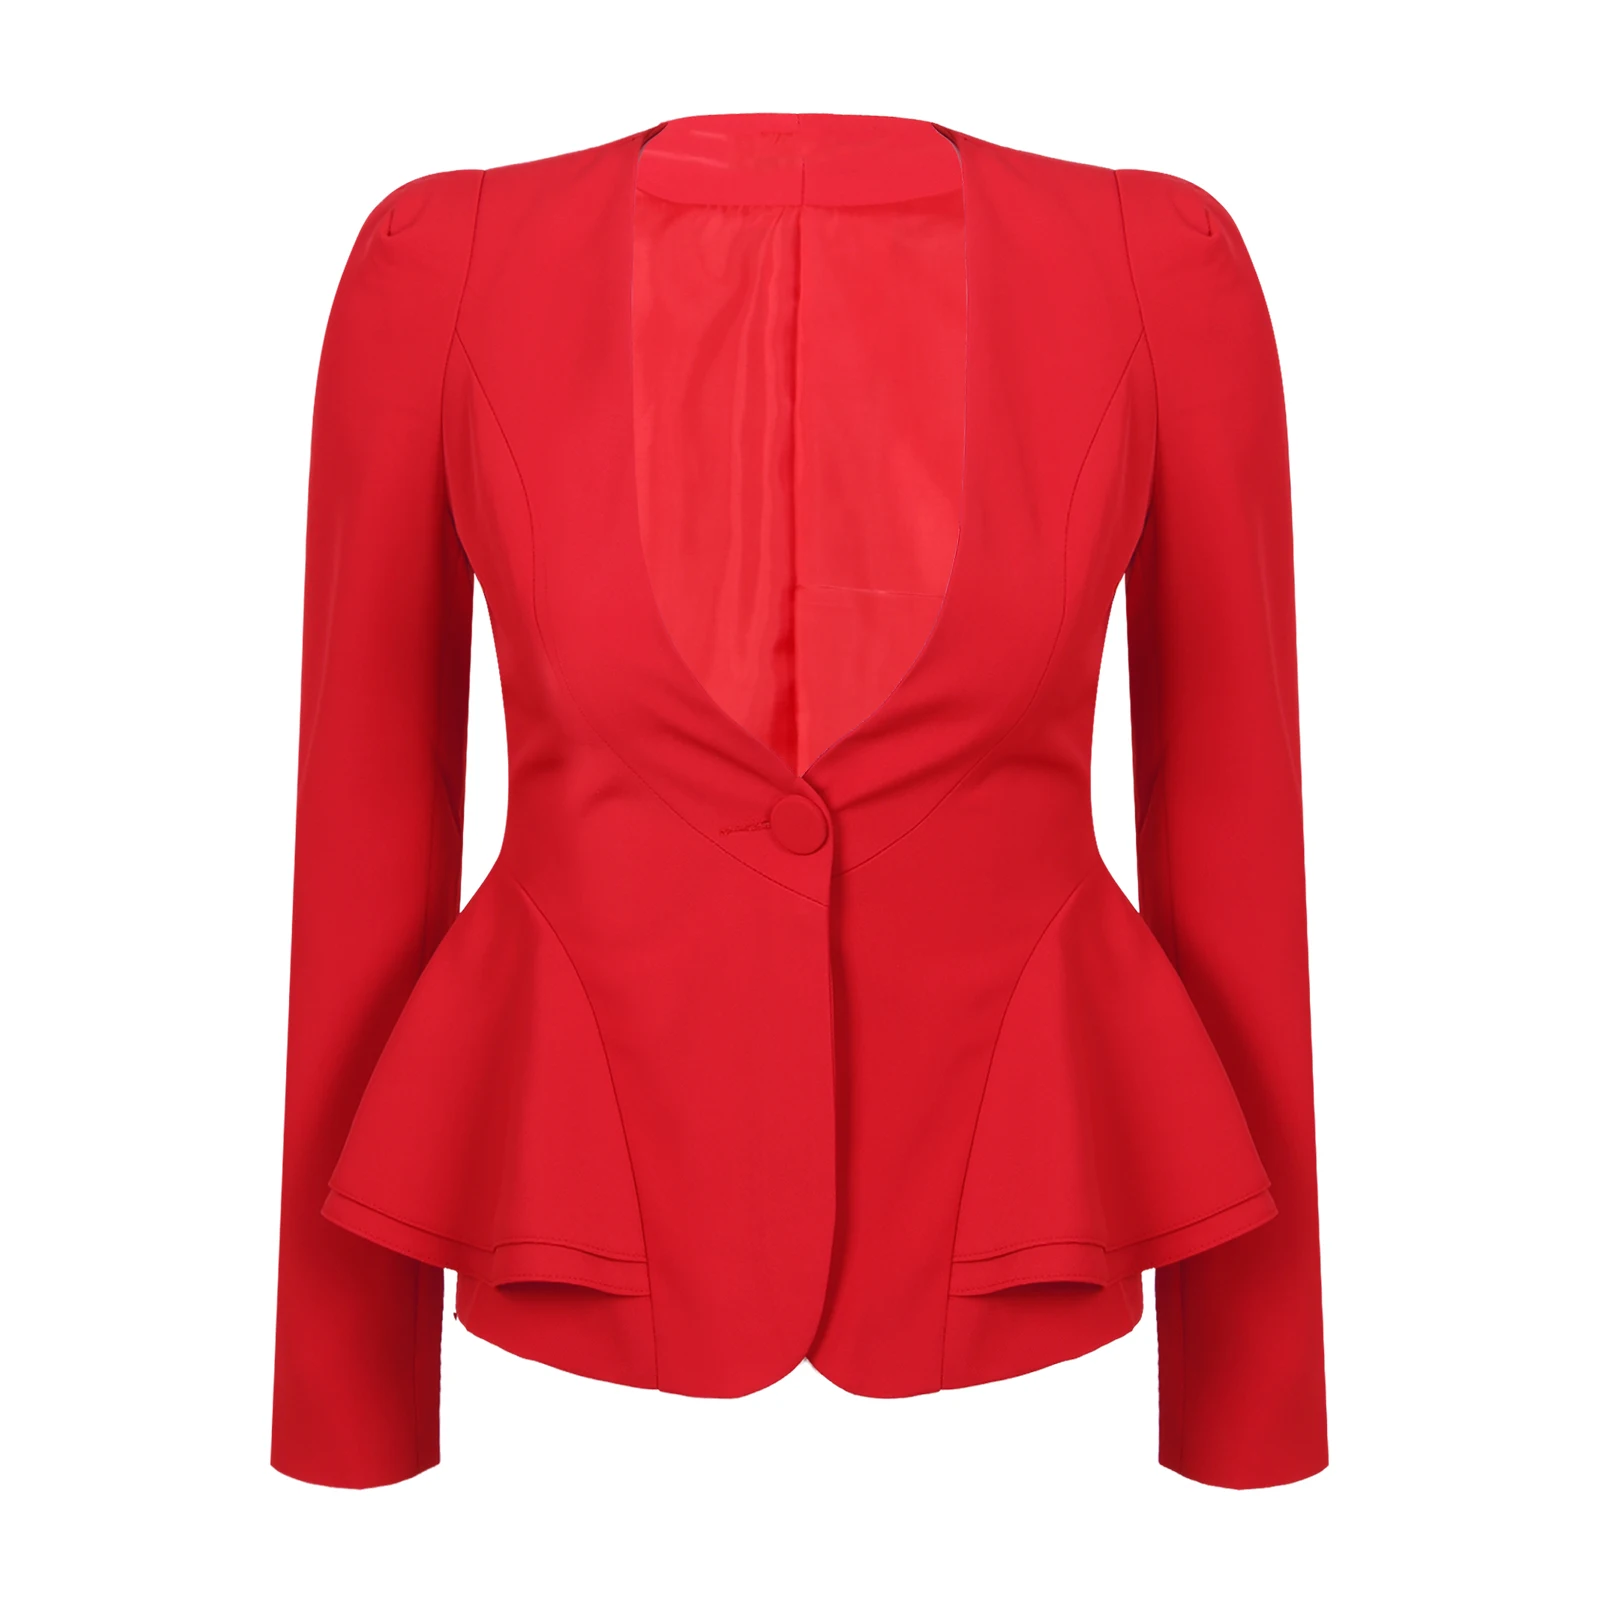 Women Red 3 Pure Colors Formal Blazers V-neck Long Sleeve Tops One-Button Slim Fit Peplum Suit Jackets for Office Meeting Wears